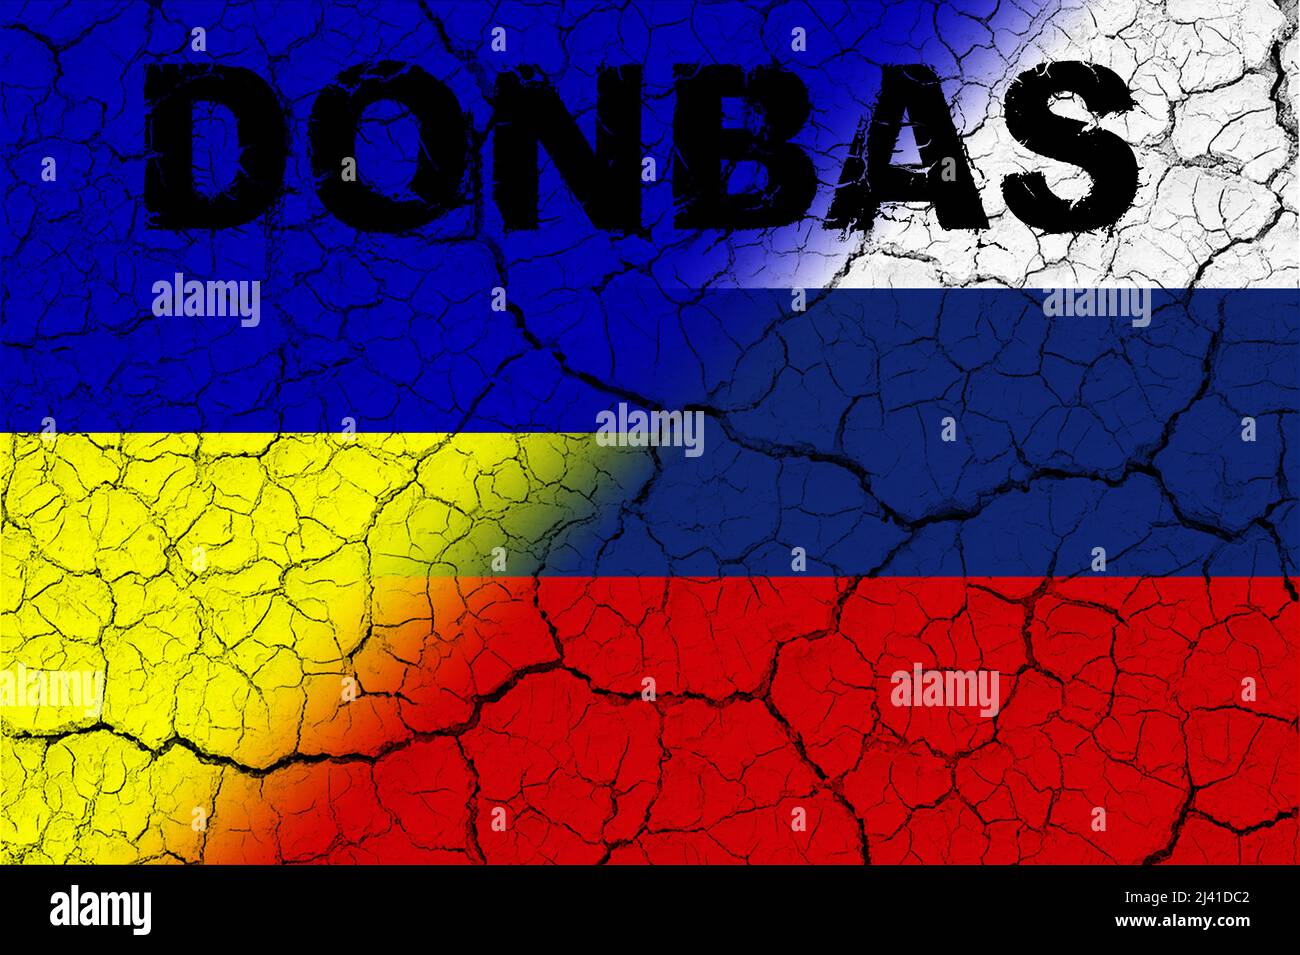 Donbas. Conflict between Ukraine and Russia. Image of the flag of Russia and the flag of Ukraine with the word Donbas written on it. Horizontal image Stock Photo